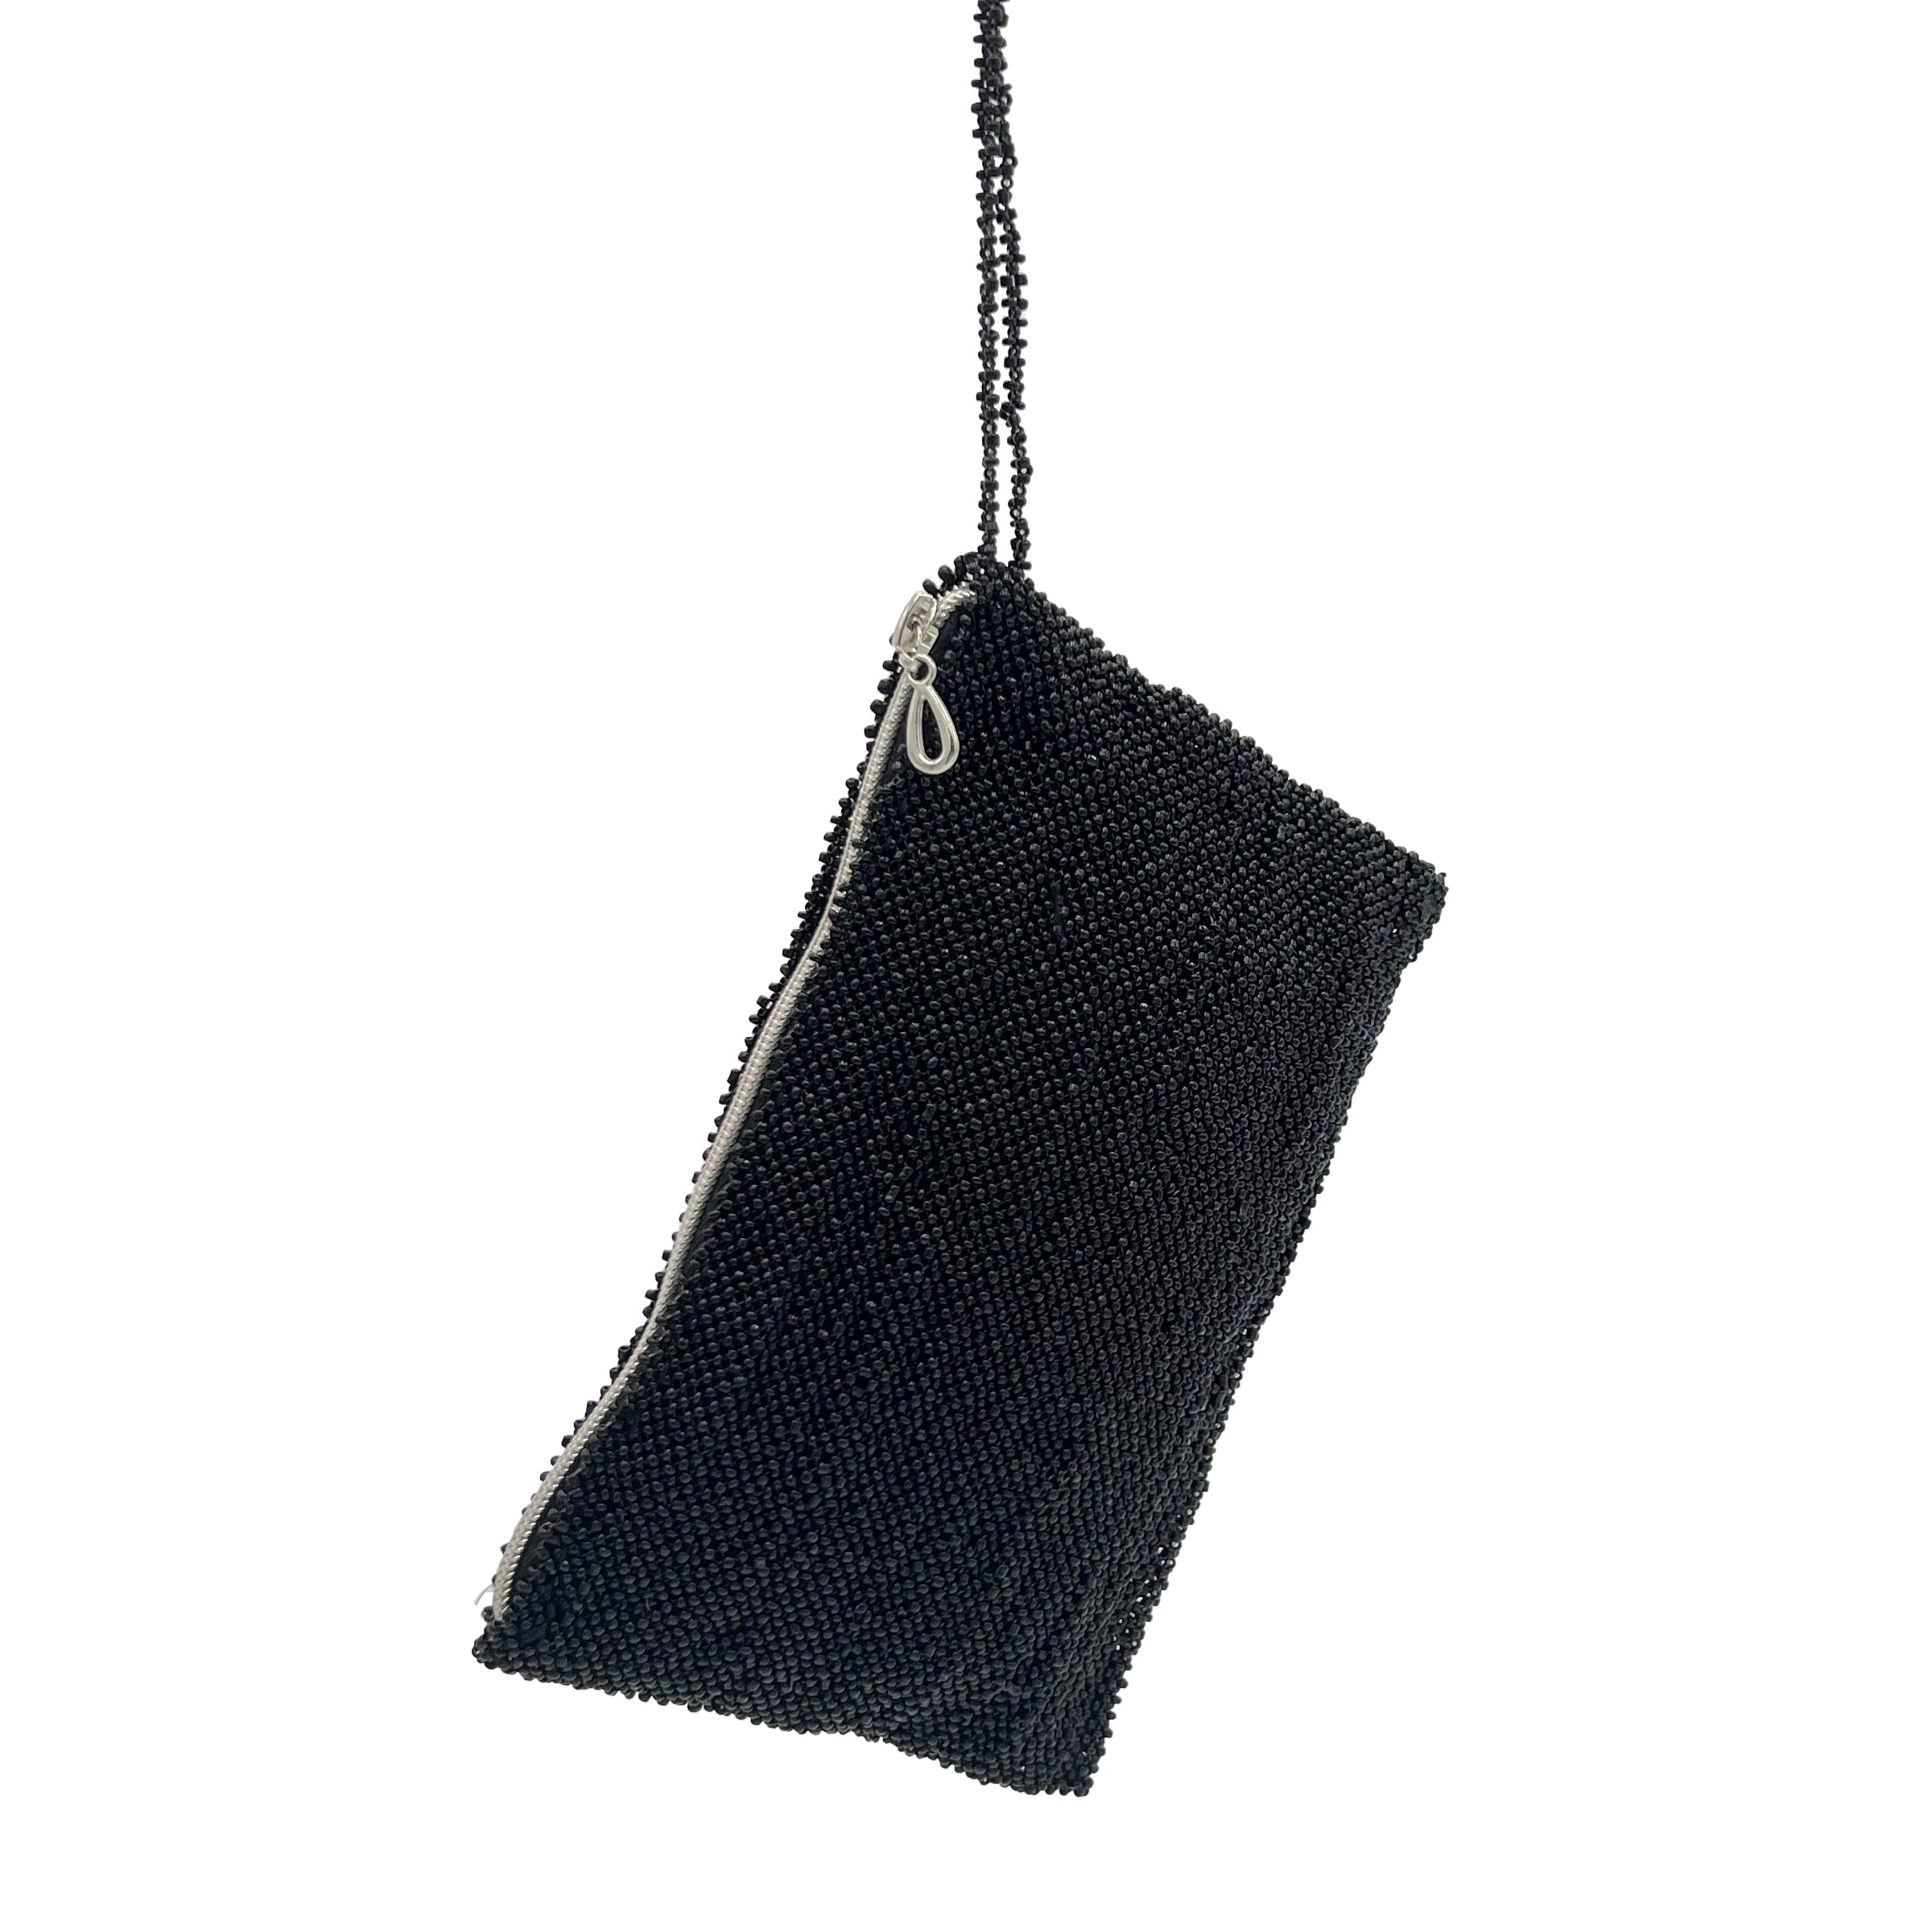 Seed Bead Pouch in Black